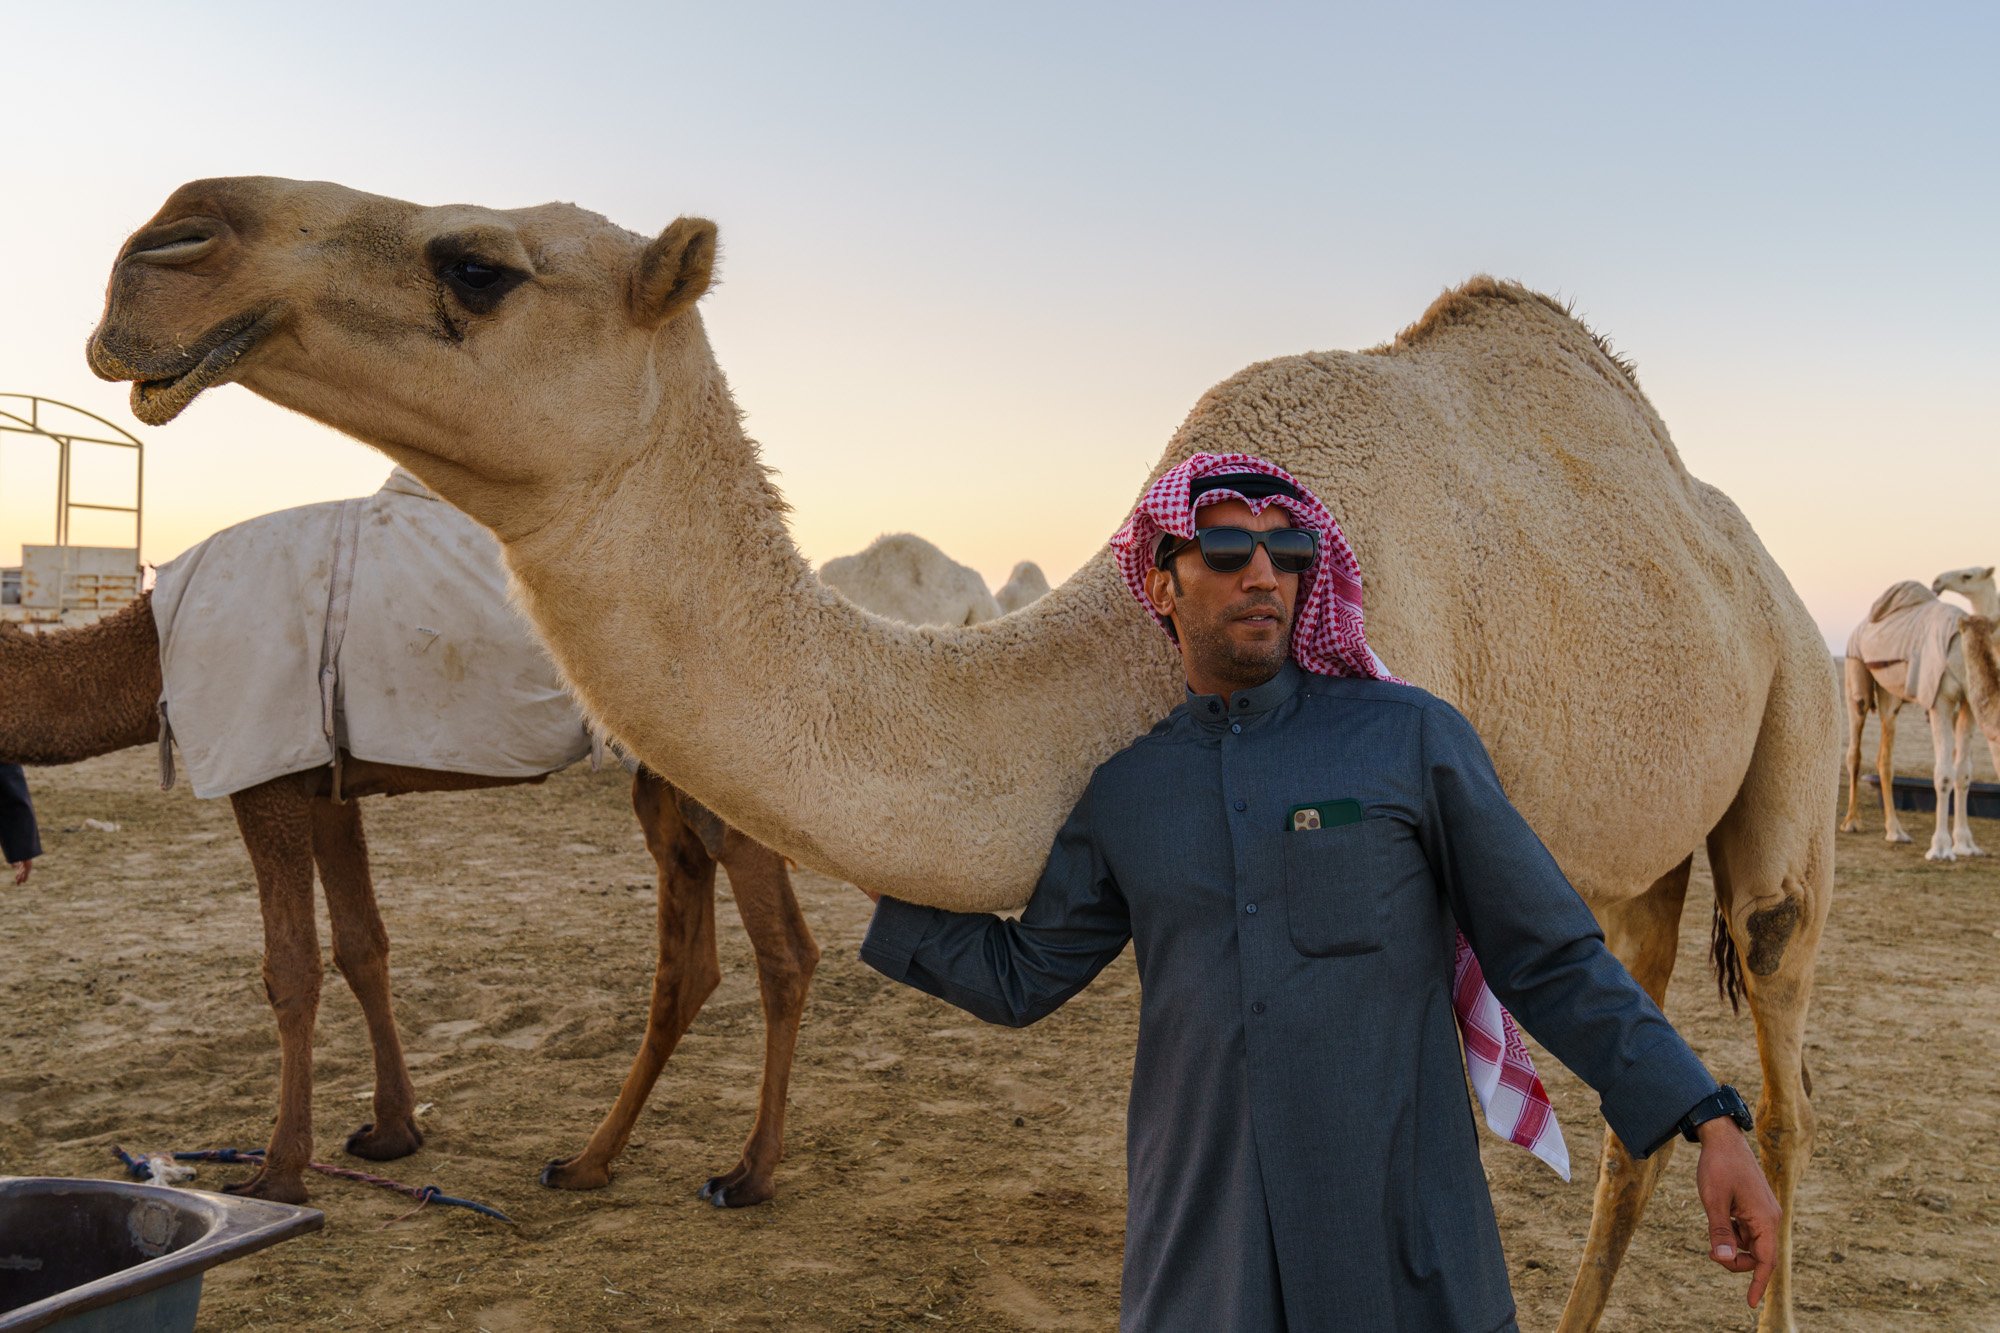  An evening with Ahmed and his camels.   Salmi Desert, North Kuwait near Iraq Border. 2021 